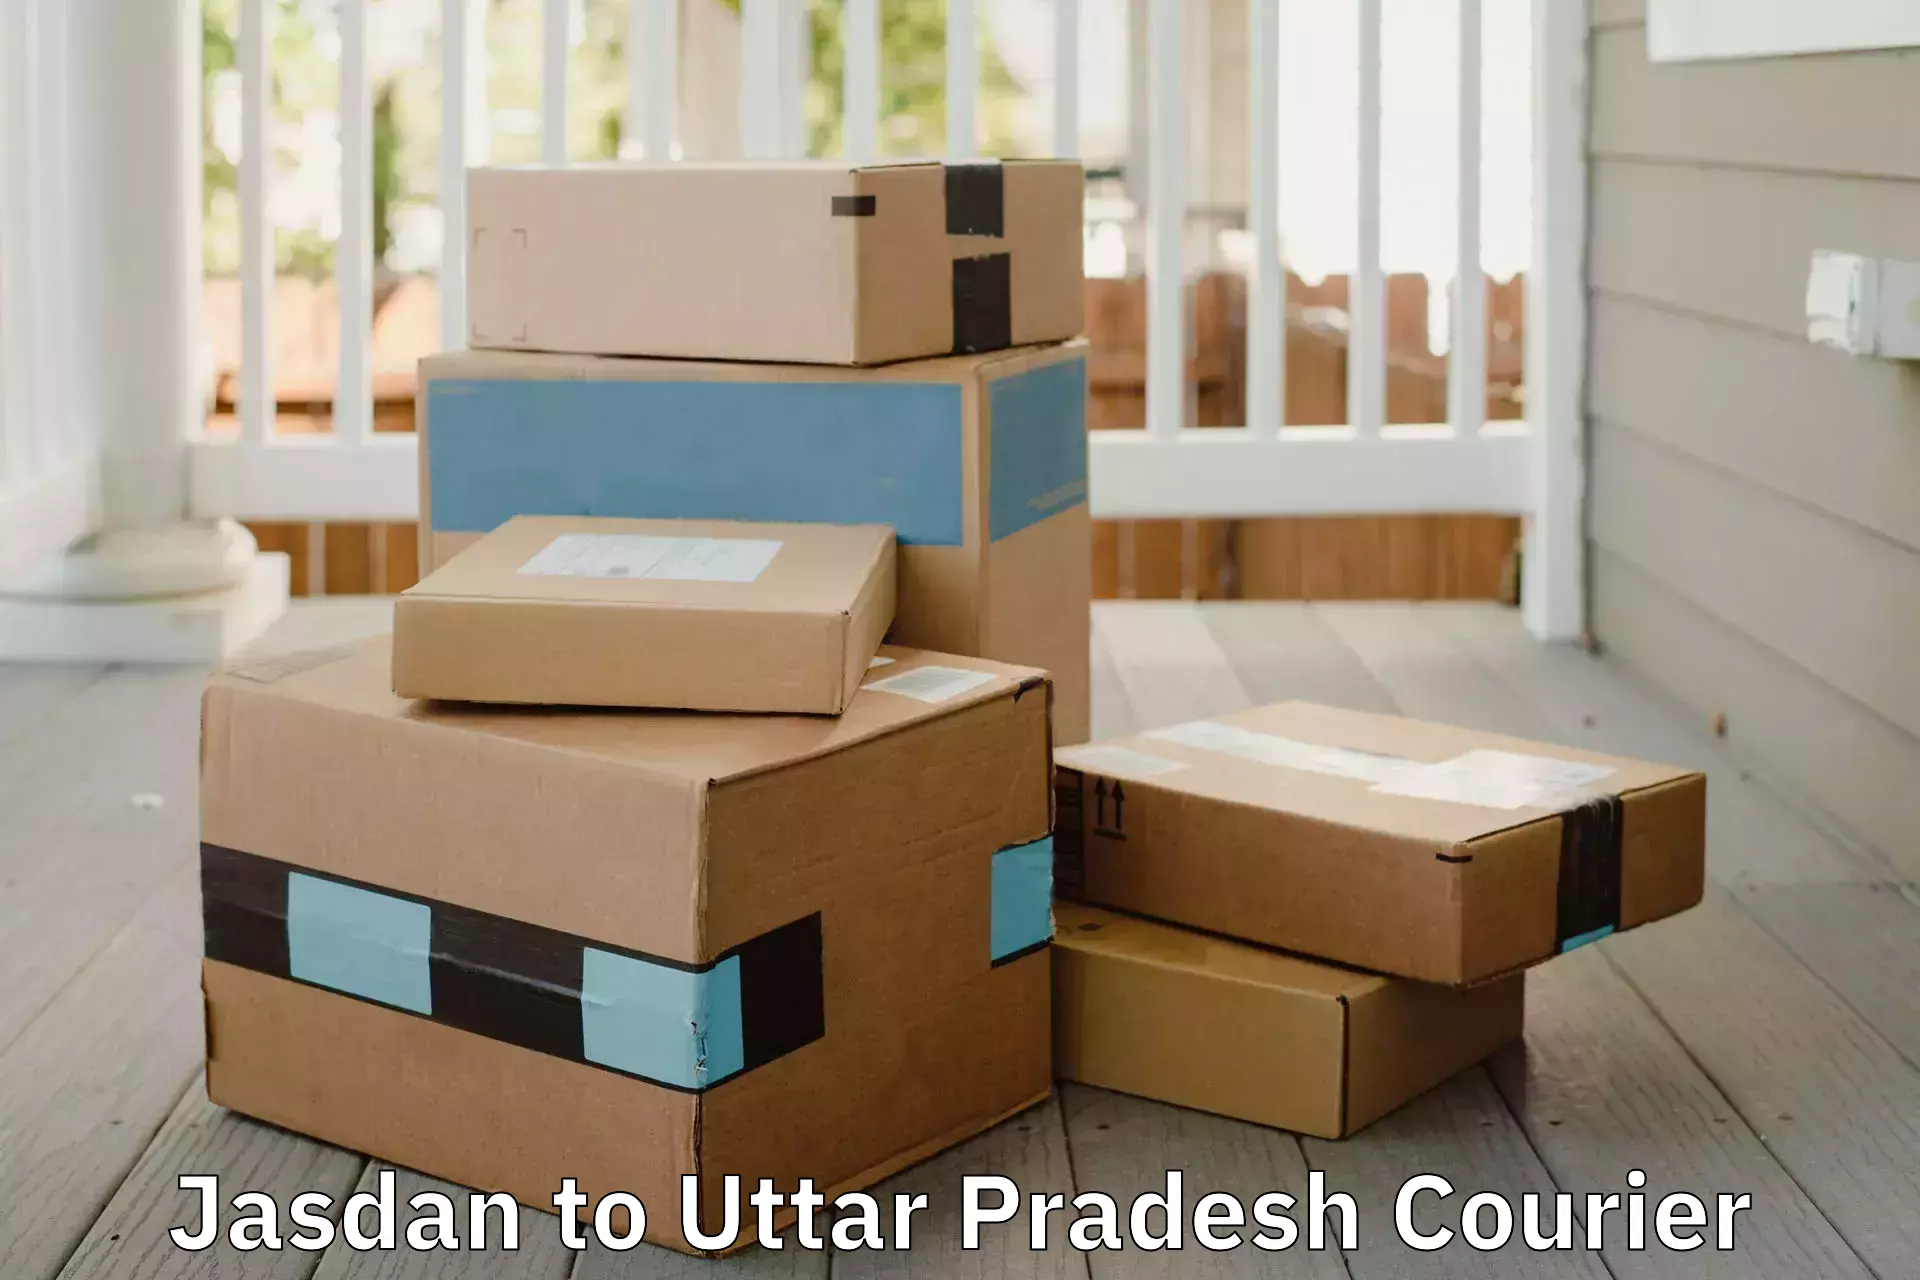 Quality furniture relocation in Jasdan to Aligarh